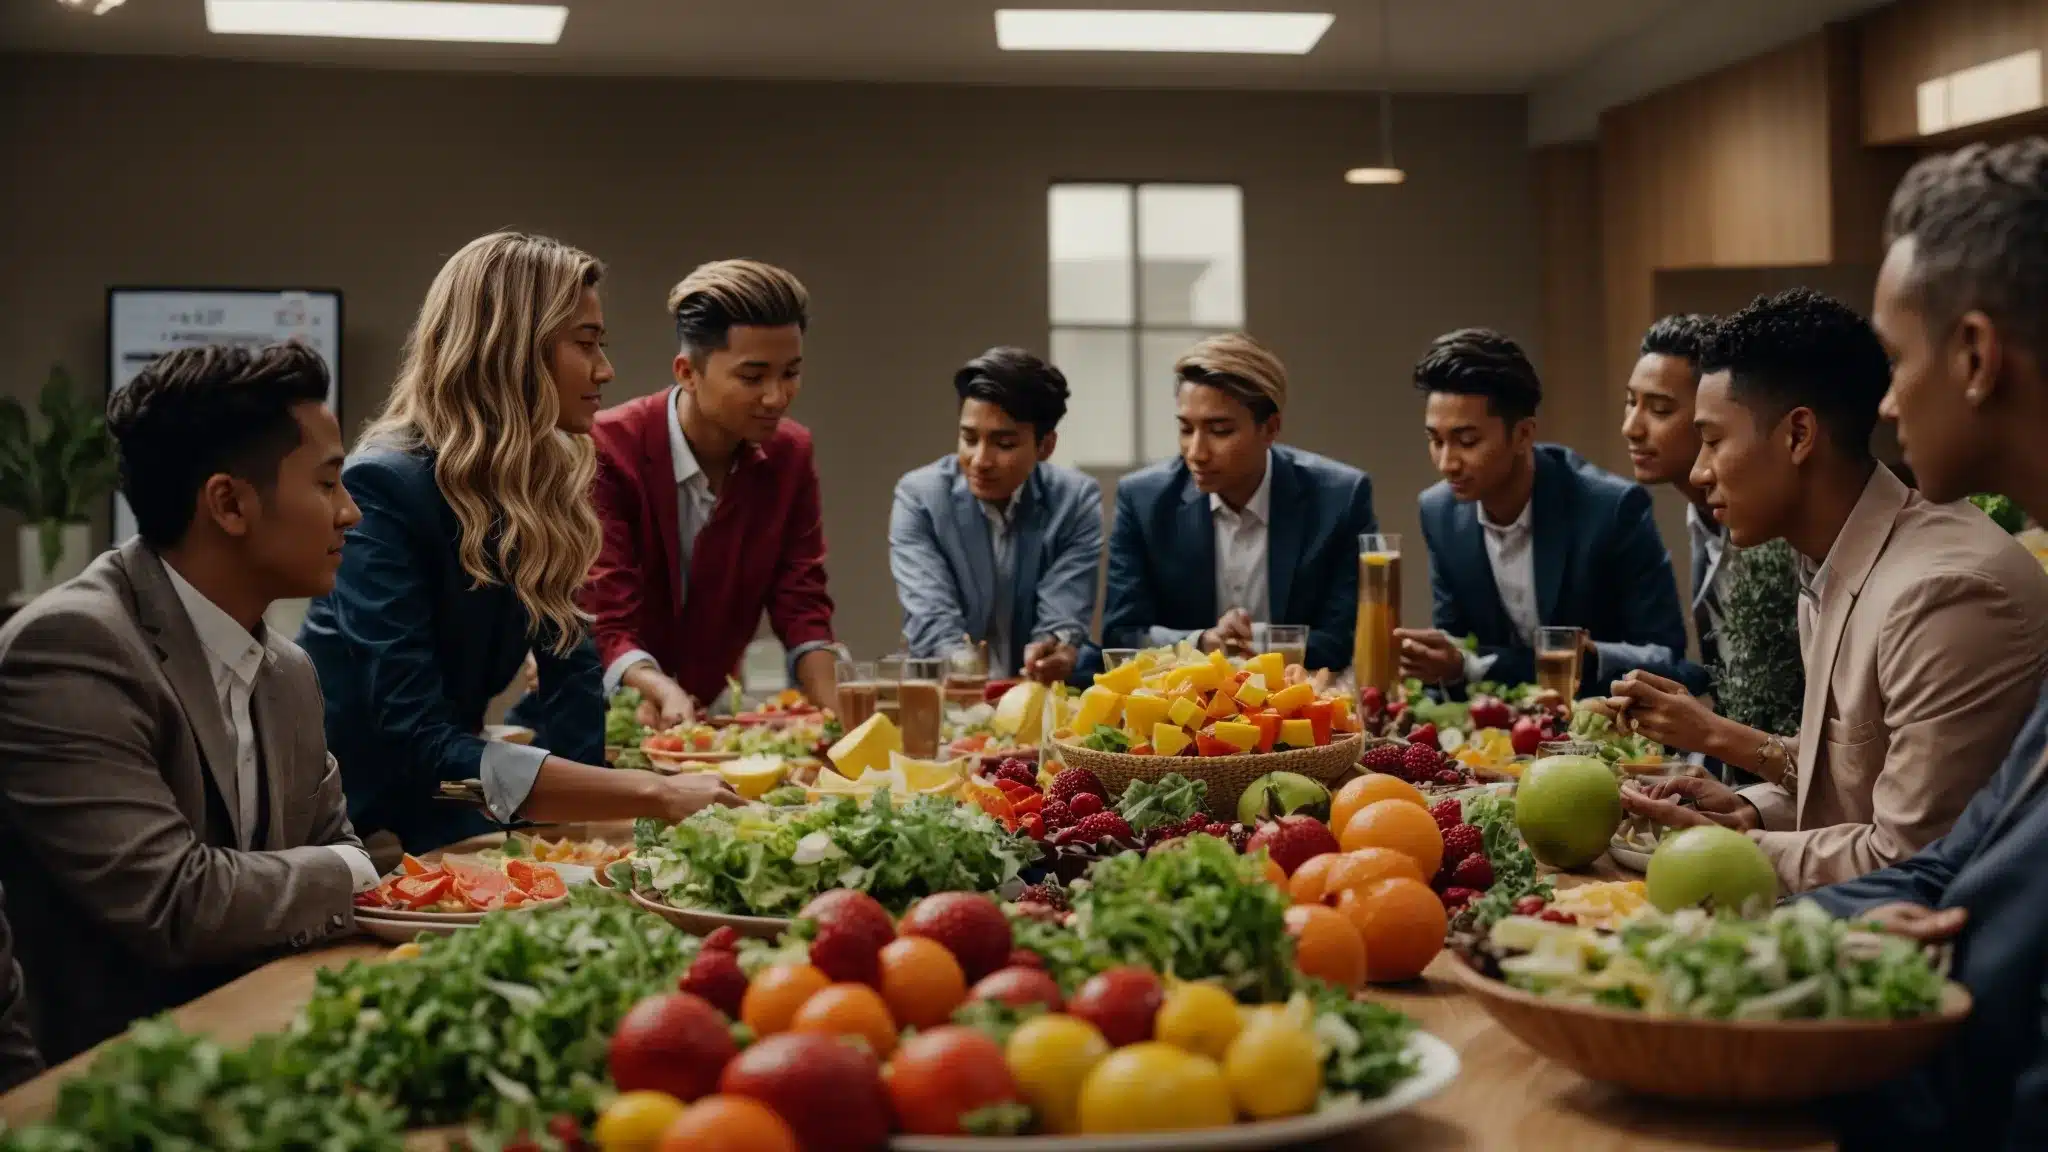 Employees Gathered Around A Conference Table Filled With A Variety Of Colorful Fruits And Salad Options.